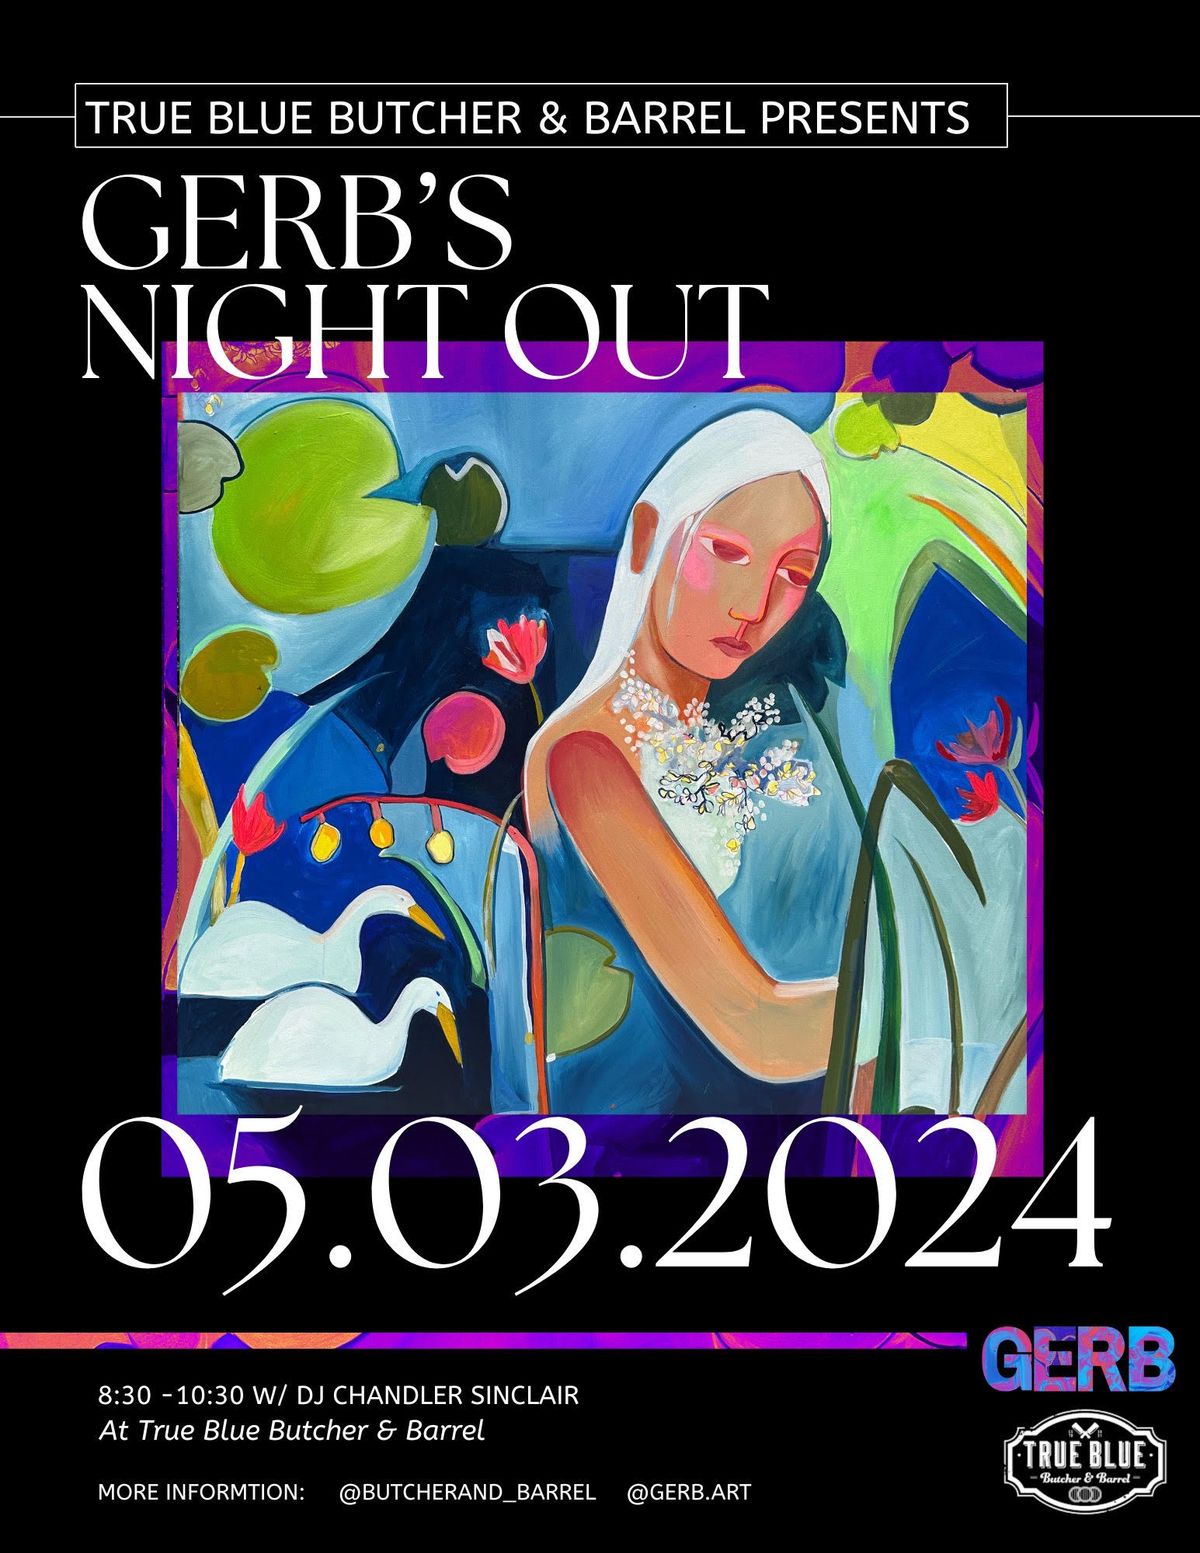 GERB's Night Out